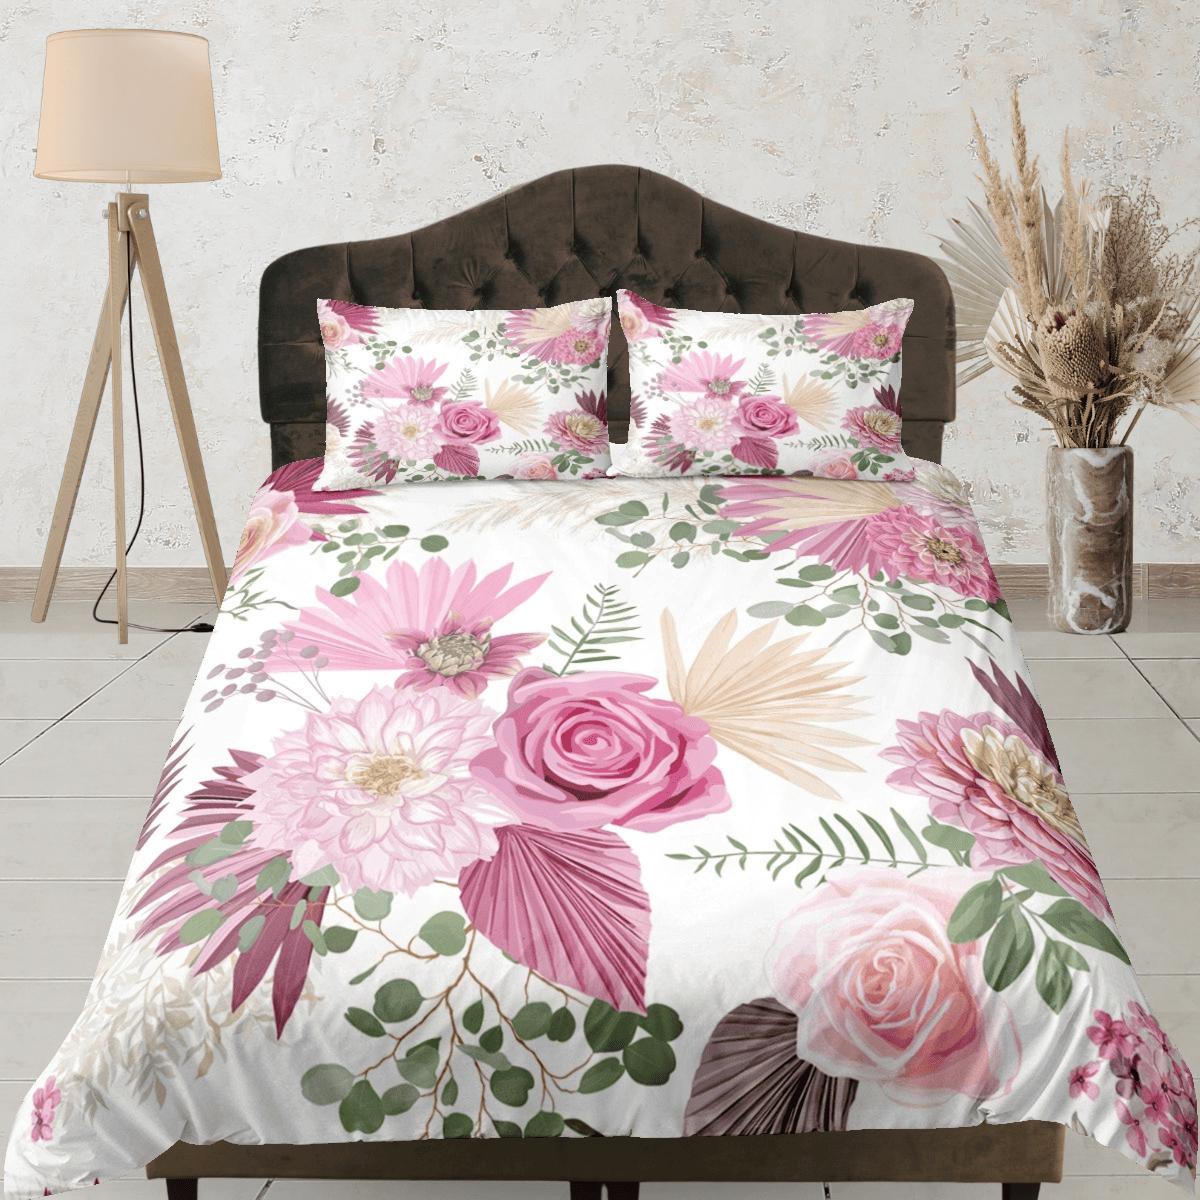 daintyduvet Bohemian pink roses and camelia duvet cover colorful bedding, teen girl bedroom, baby girl crib bedding boho maximalist bedspread aesthetic